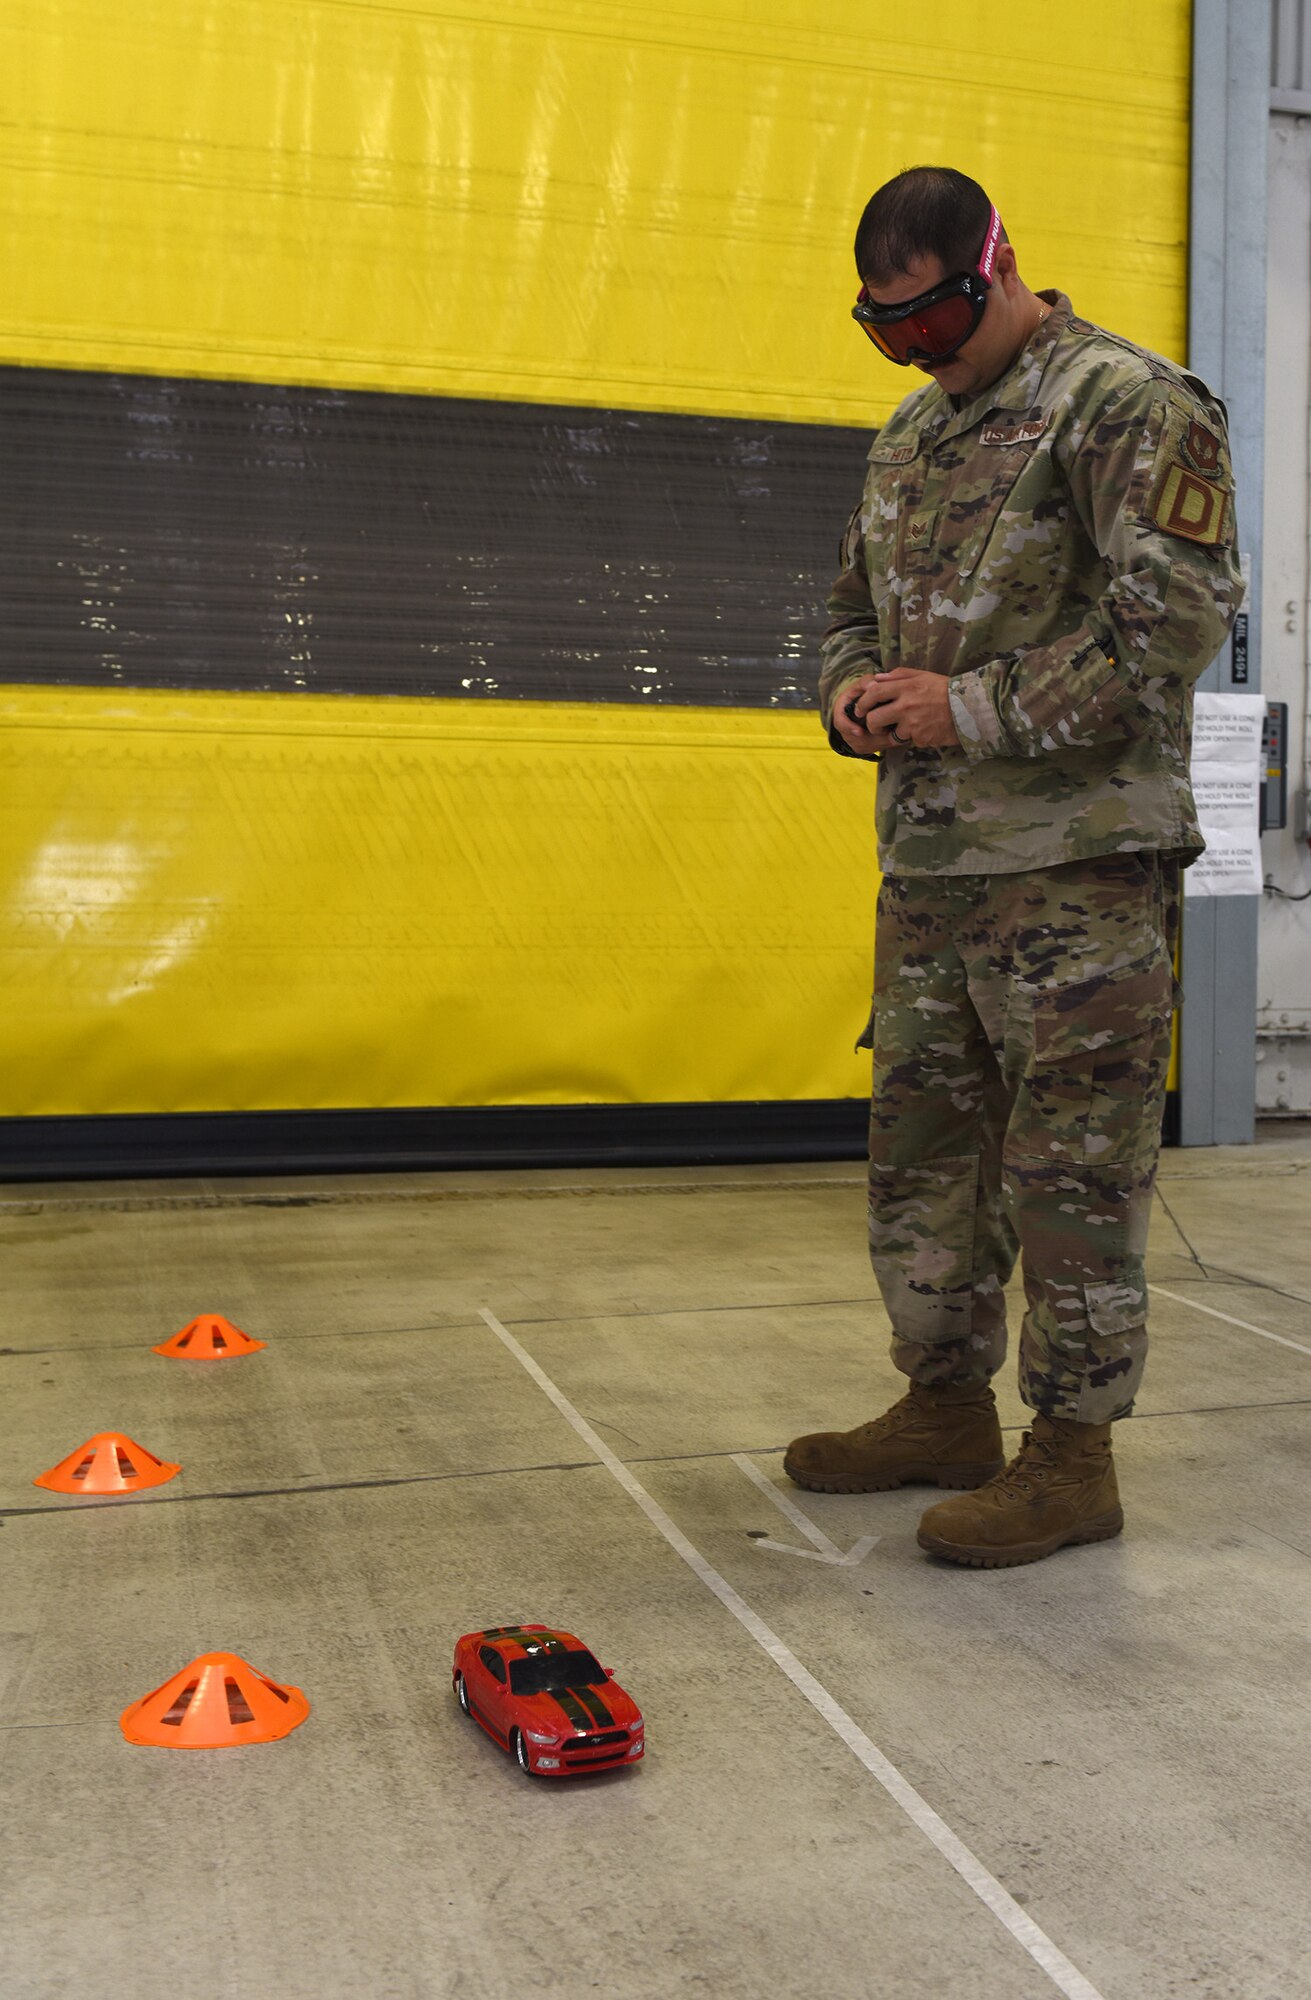 An Airman from the 100th Logistics Readiness Squadron attempts to steer a remote-control car through a mini course while wearing “drunk goggles” at an event to highlight the dangers of drunk driving at RAF Mildenhall, England, Oct. 11, 2019. Members of Suffolk Police, along with the 48th Medical Operations Squadron Alcohol and Drug Prevention and Treatment Program, attended the safety event to show the effects alcohol has on motor skills. (U.S. Air Force photo by Karen Abeyasekere)